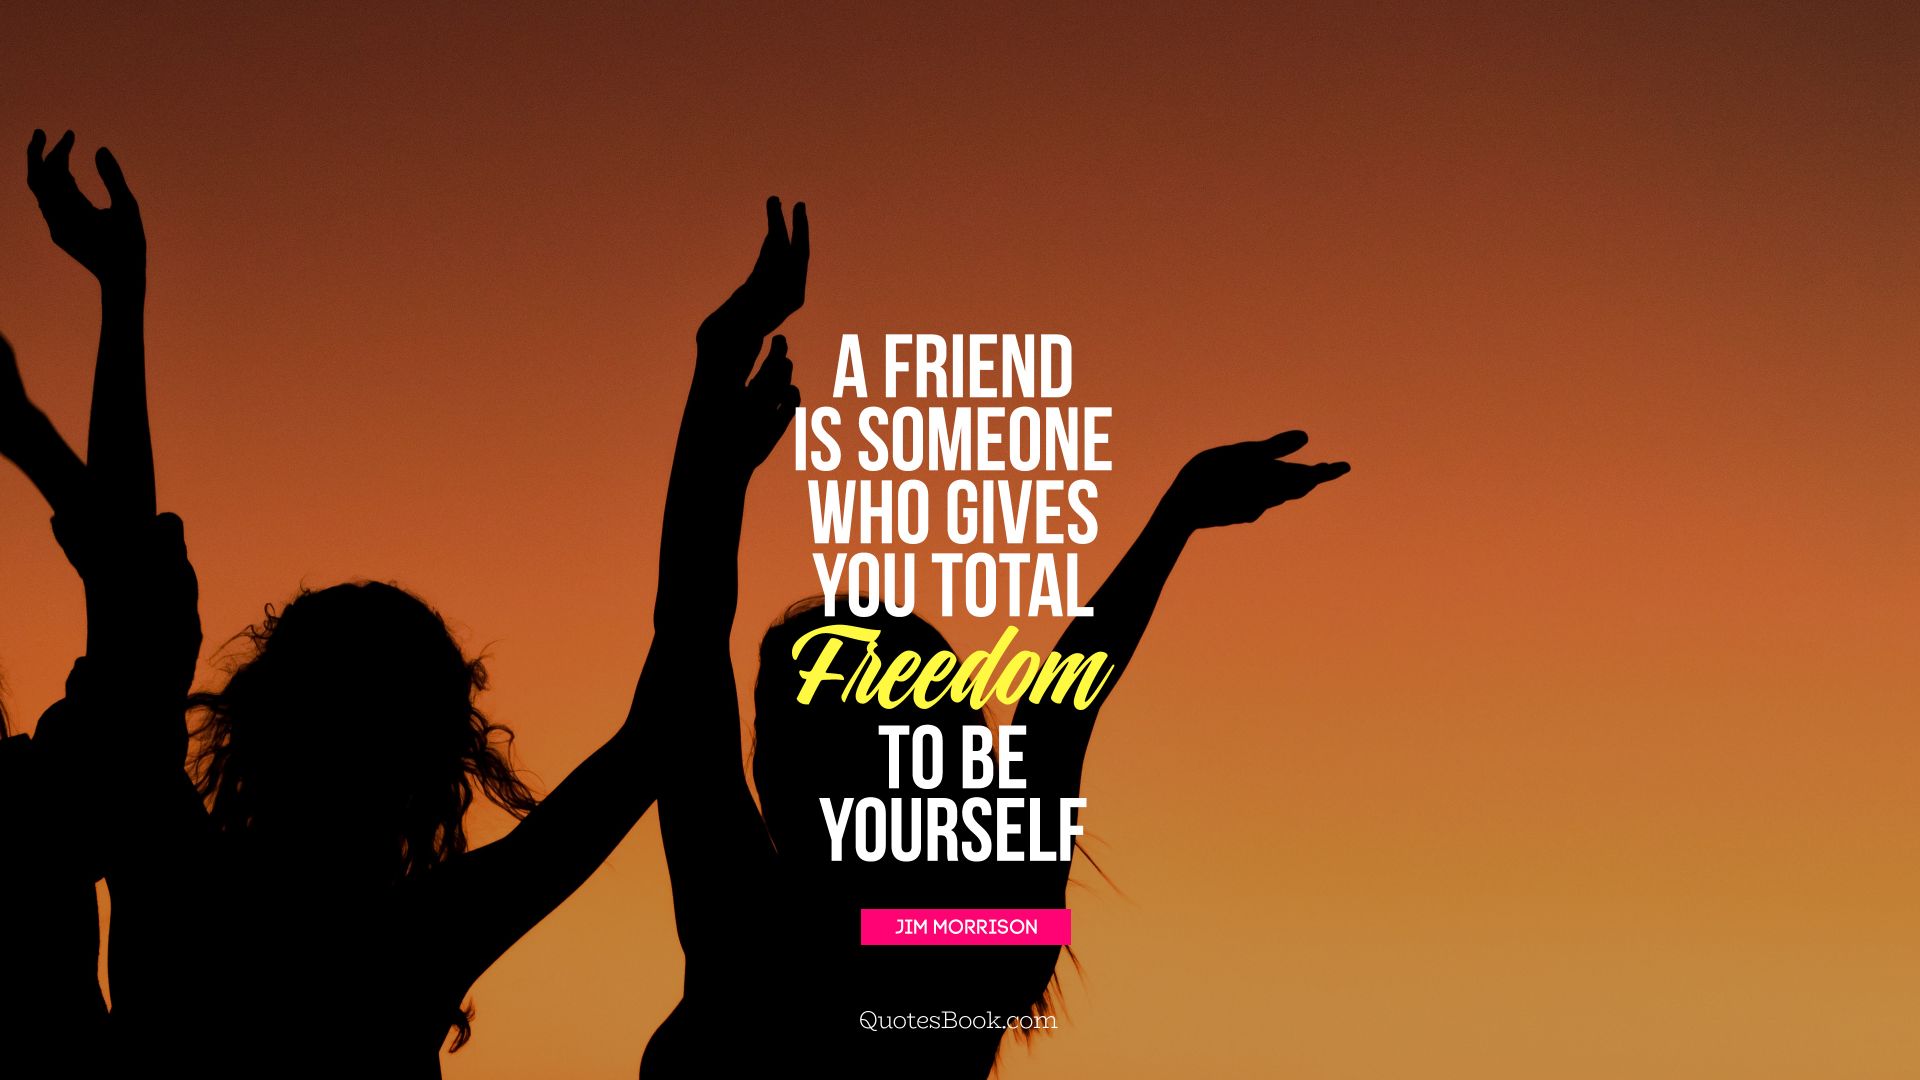 A friend is someone who gives you total freedom to be yourself. - Quote by Jim Morrison